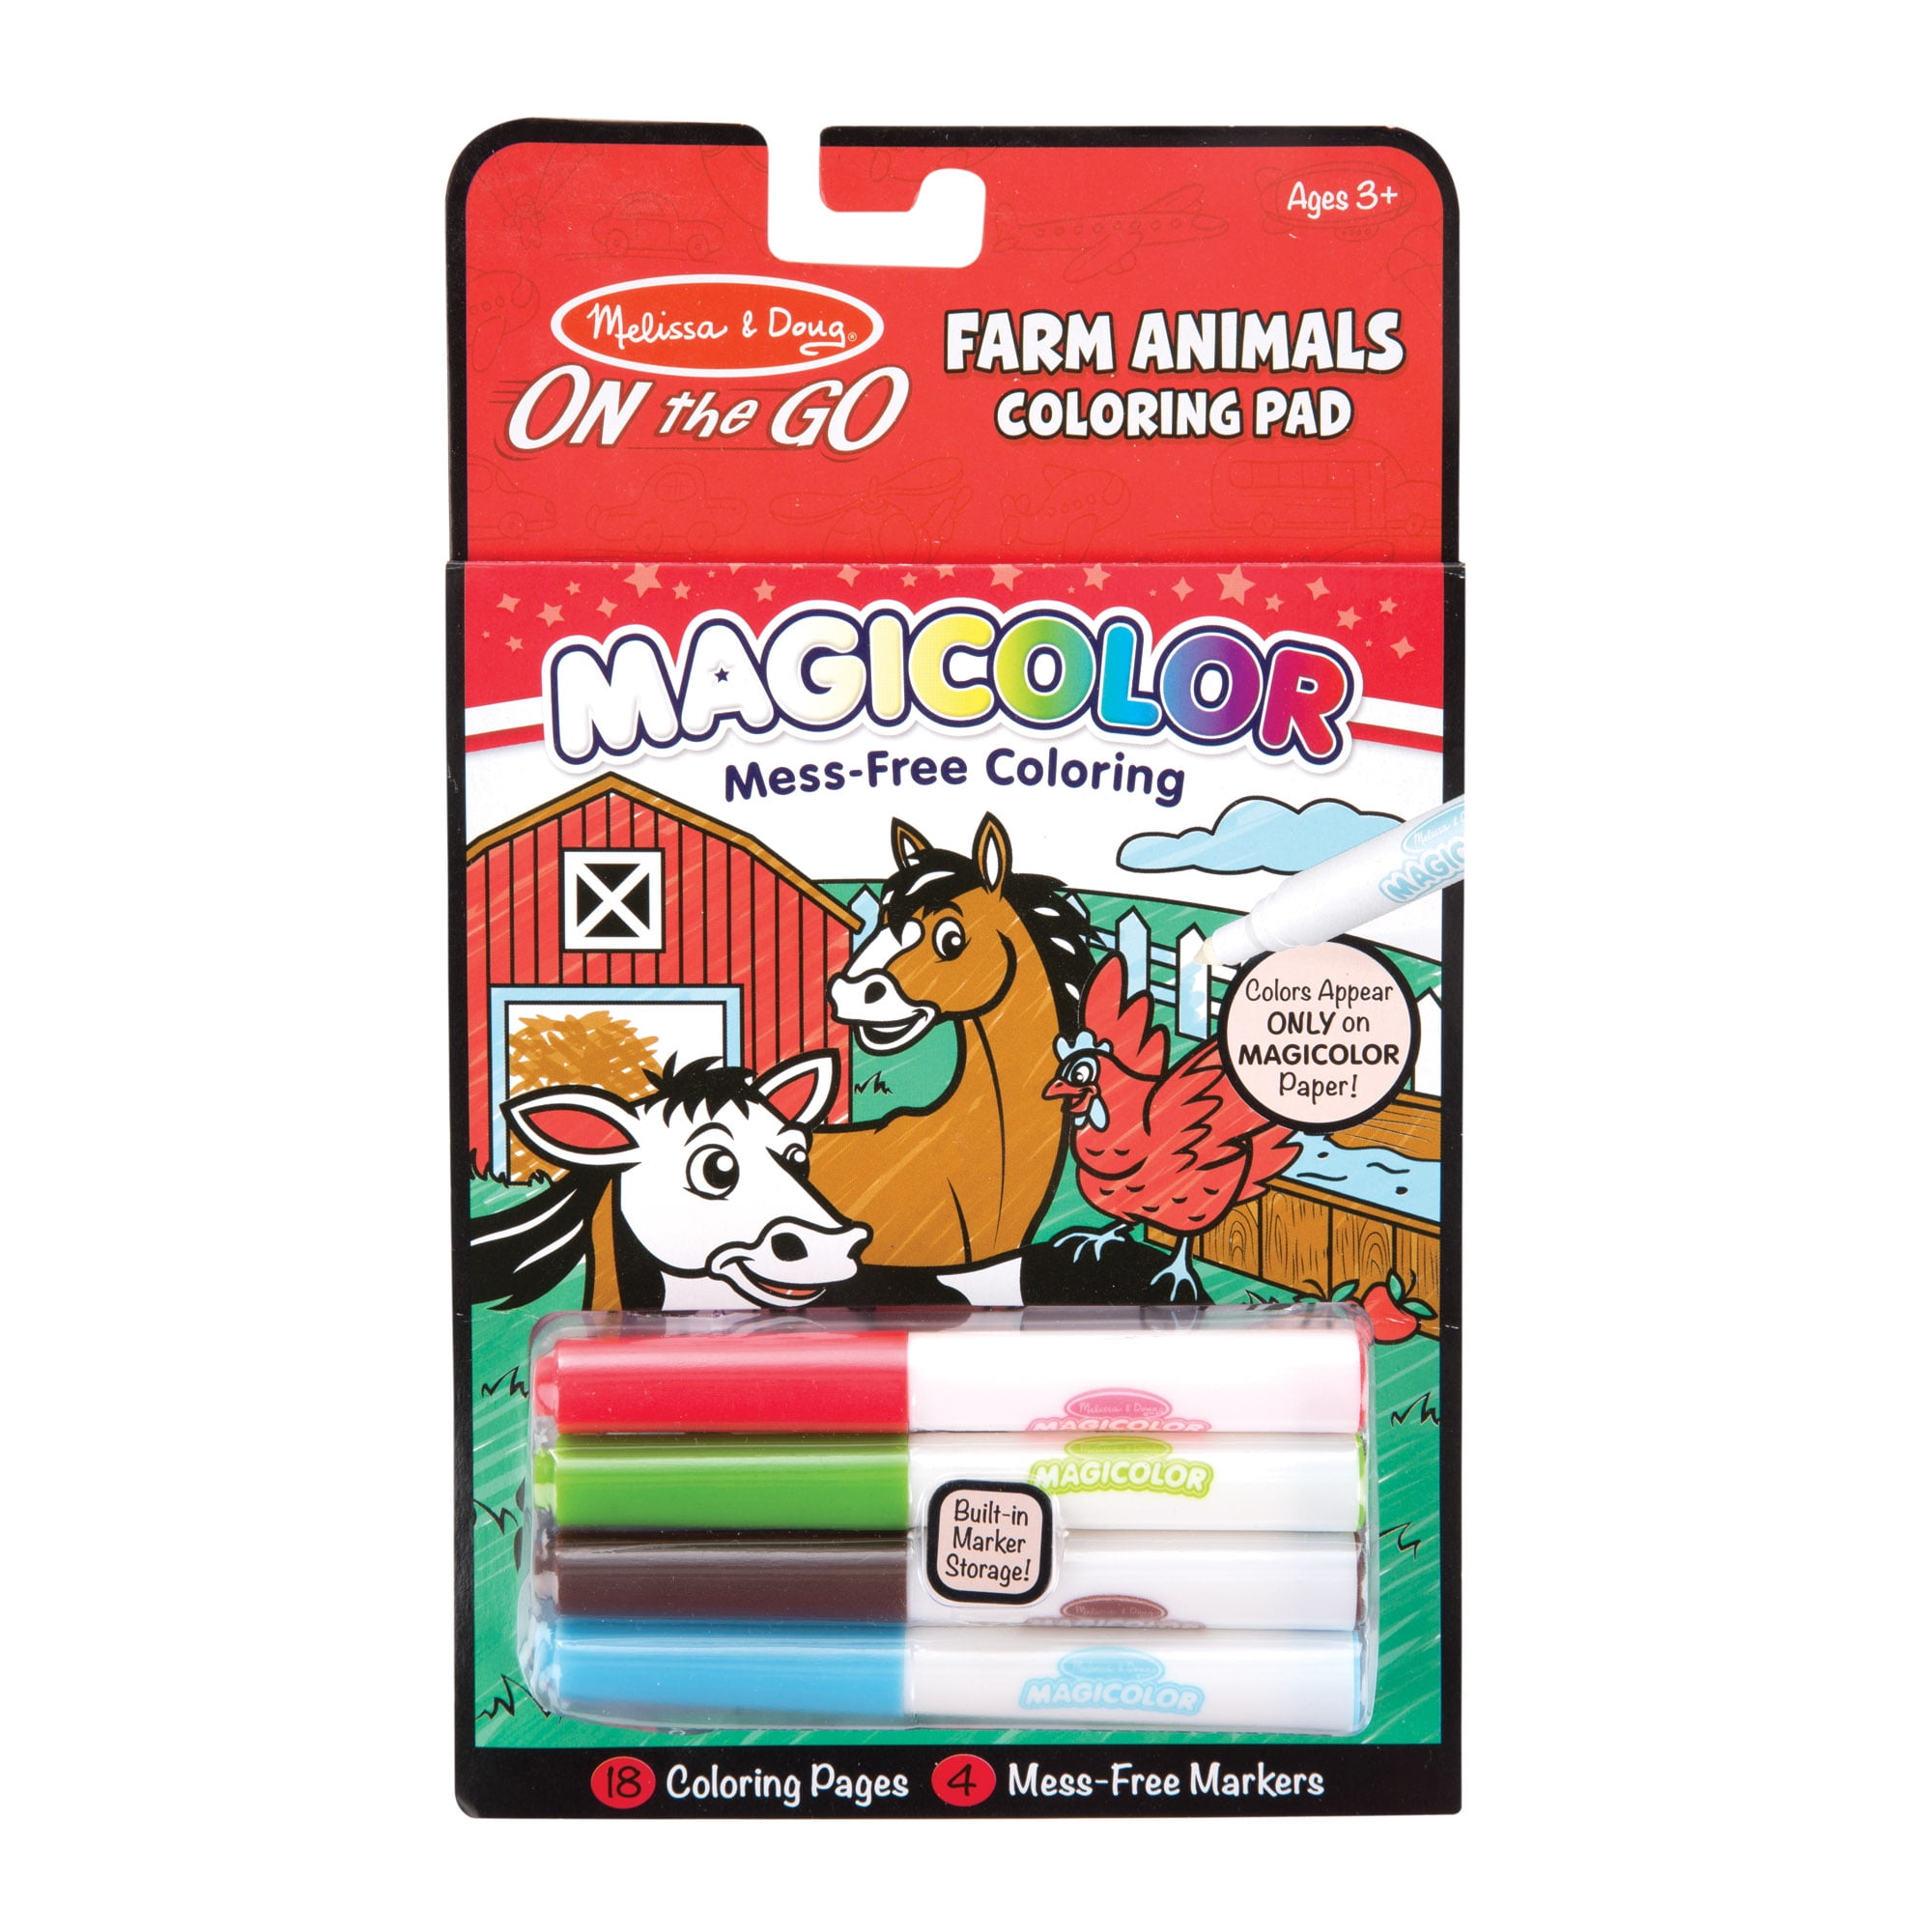 Melissa & Doug On the Go Magicolor Coloring Pad with 4 Mess-Free Markers,  Travel Toy for Boys and Girls Ages 3+ - Farm Animals - FSC Certified 